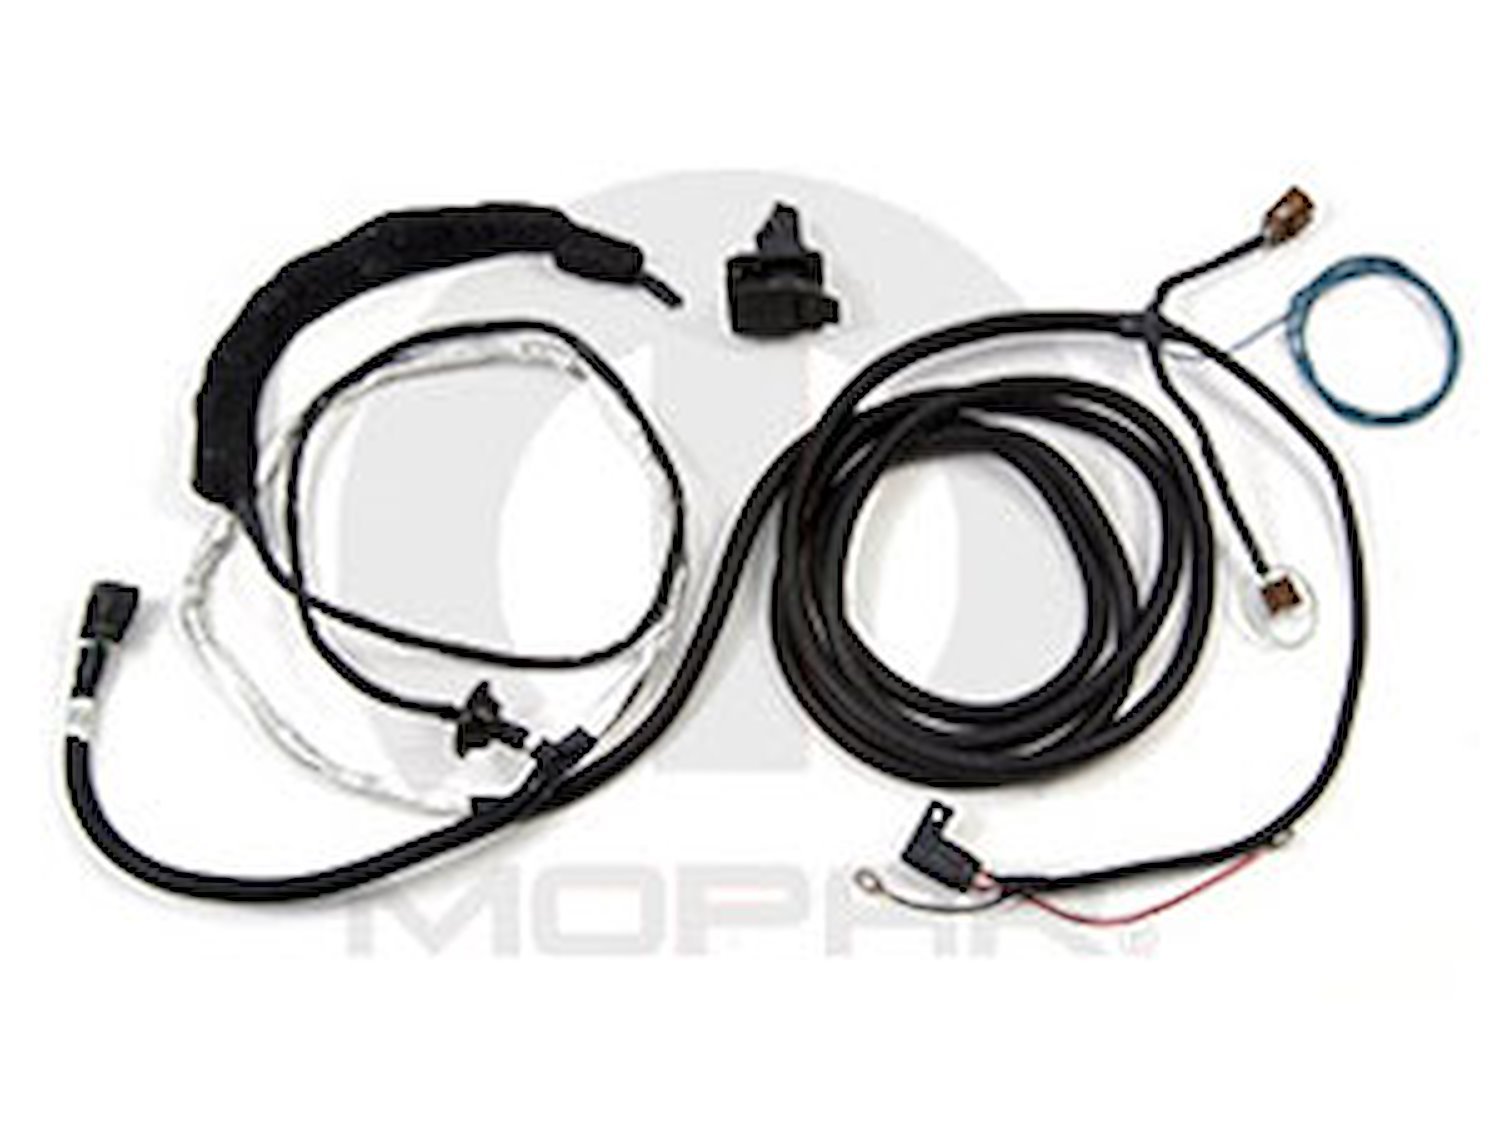 Trailer Tow Wire Harness Kit 2011-13 Chrysler 200